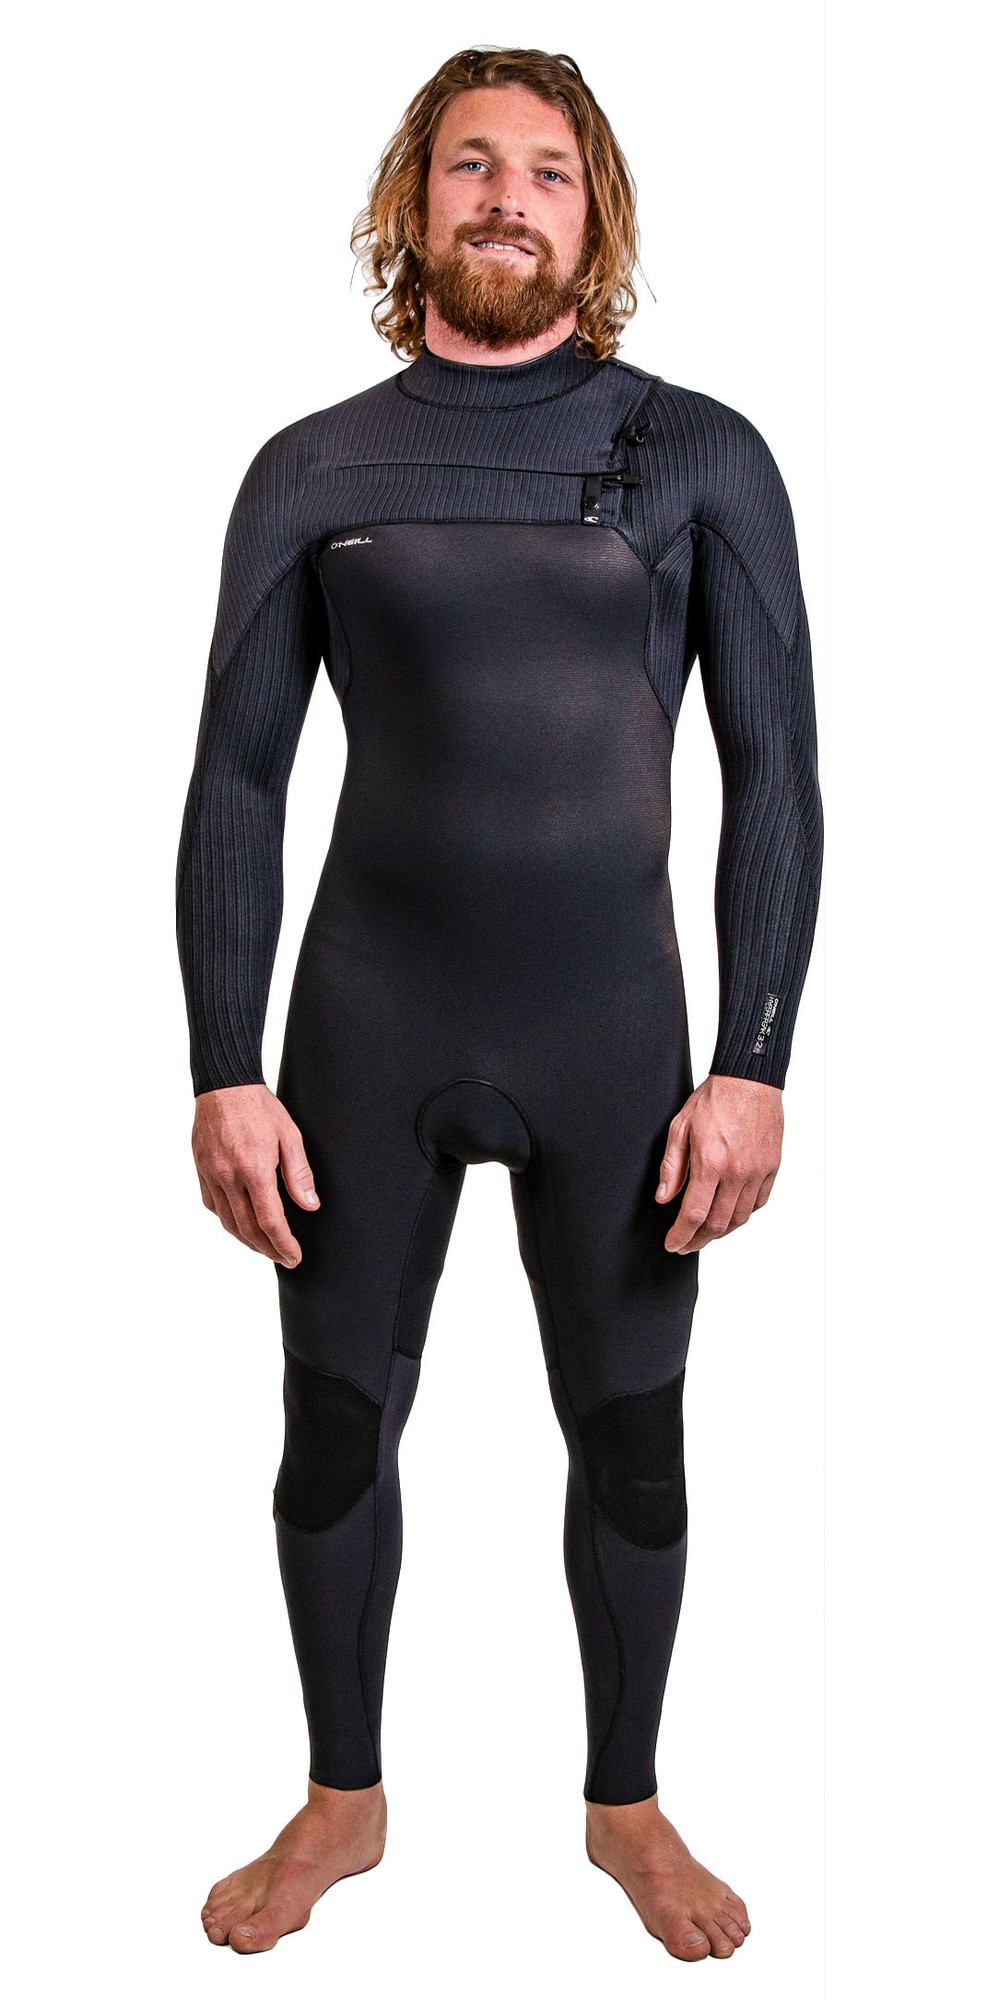 Chest Zip Entry over a 360° Barrier with Drain Holes 5/4mm Chest Zip Wetsuit Black ONeill Mens HyperFreak 